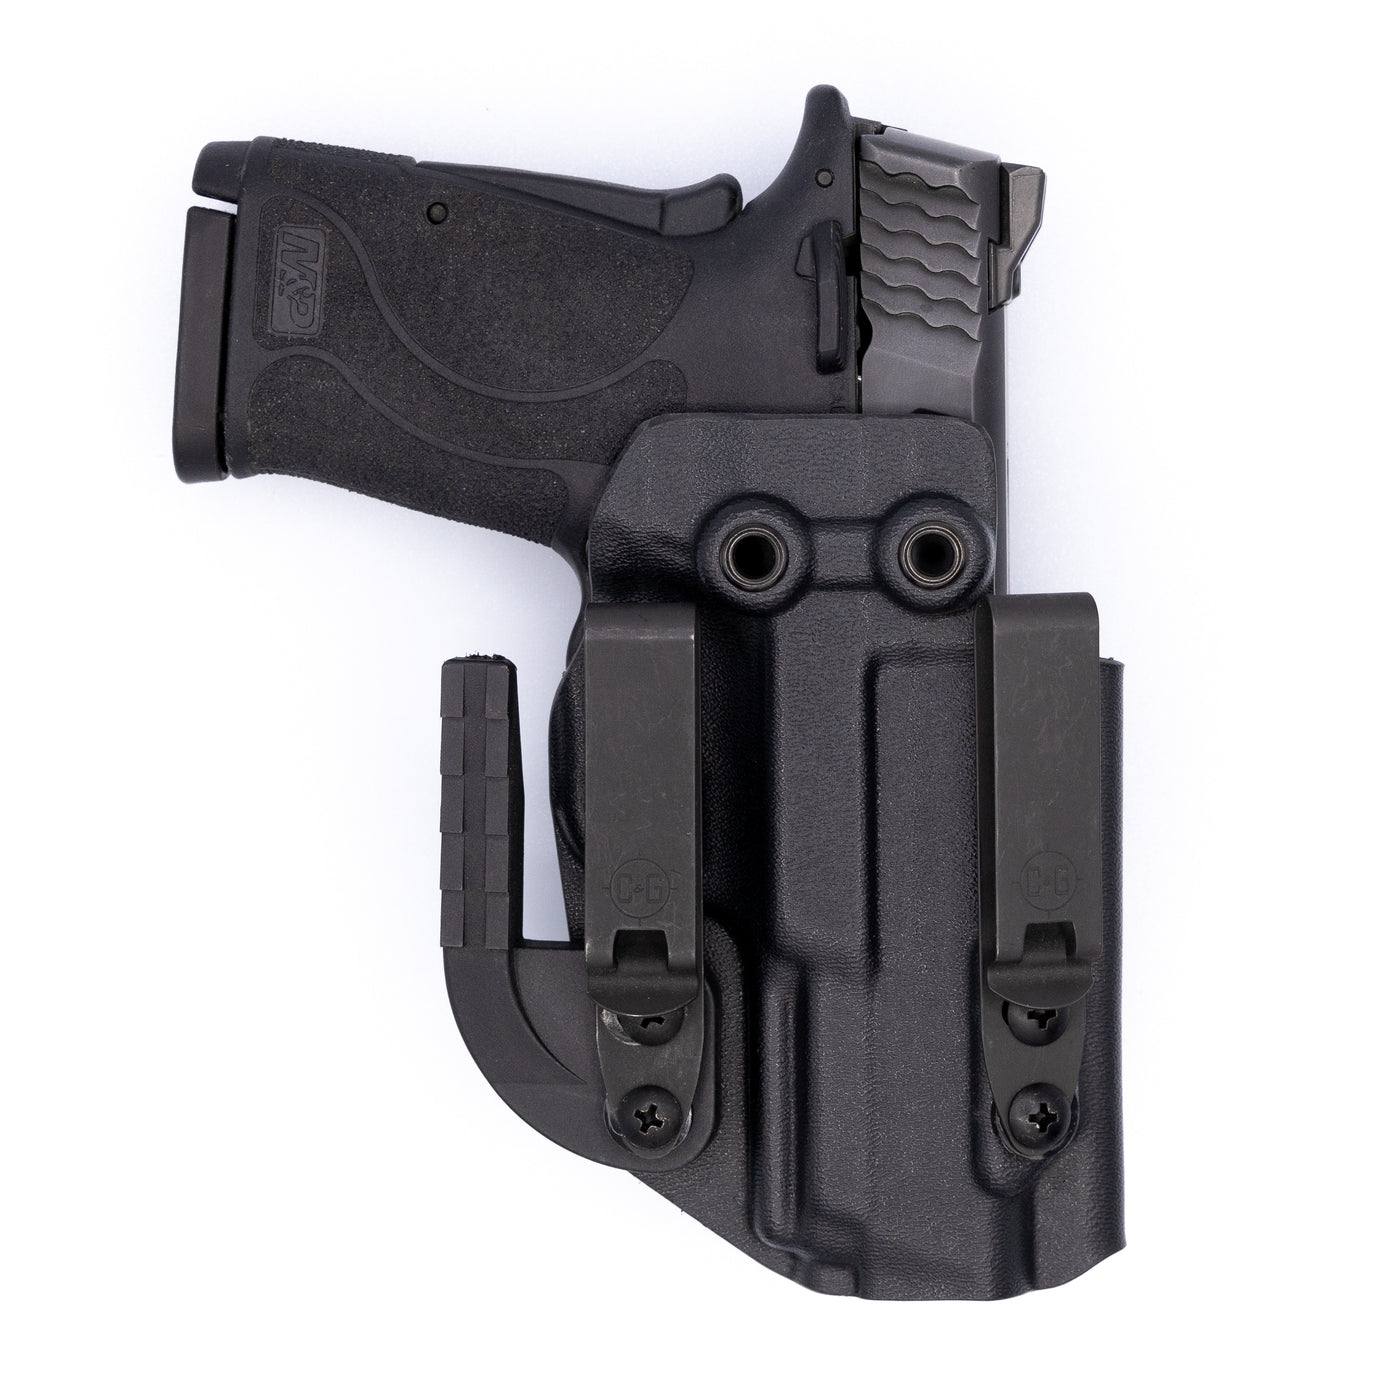 This is the custom C&G Holsters Covert ALPHA upgrade holster for the Smith & Wesson M&P Shield 9EZ